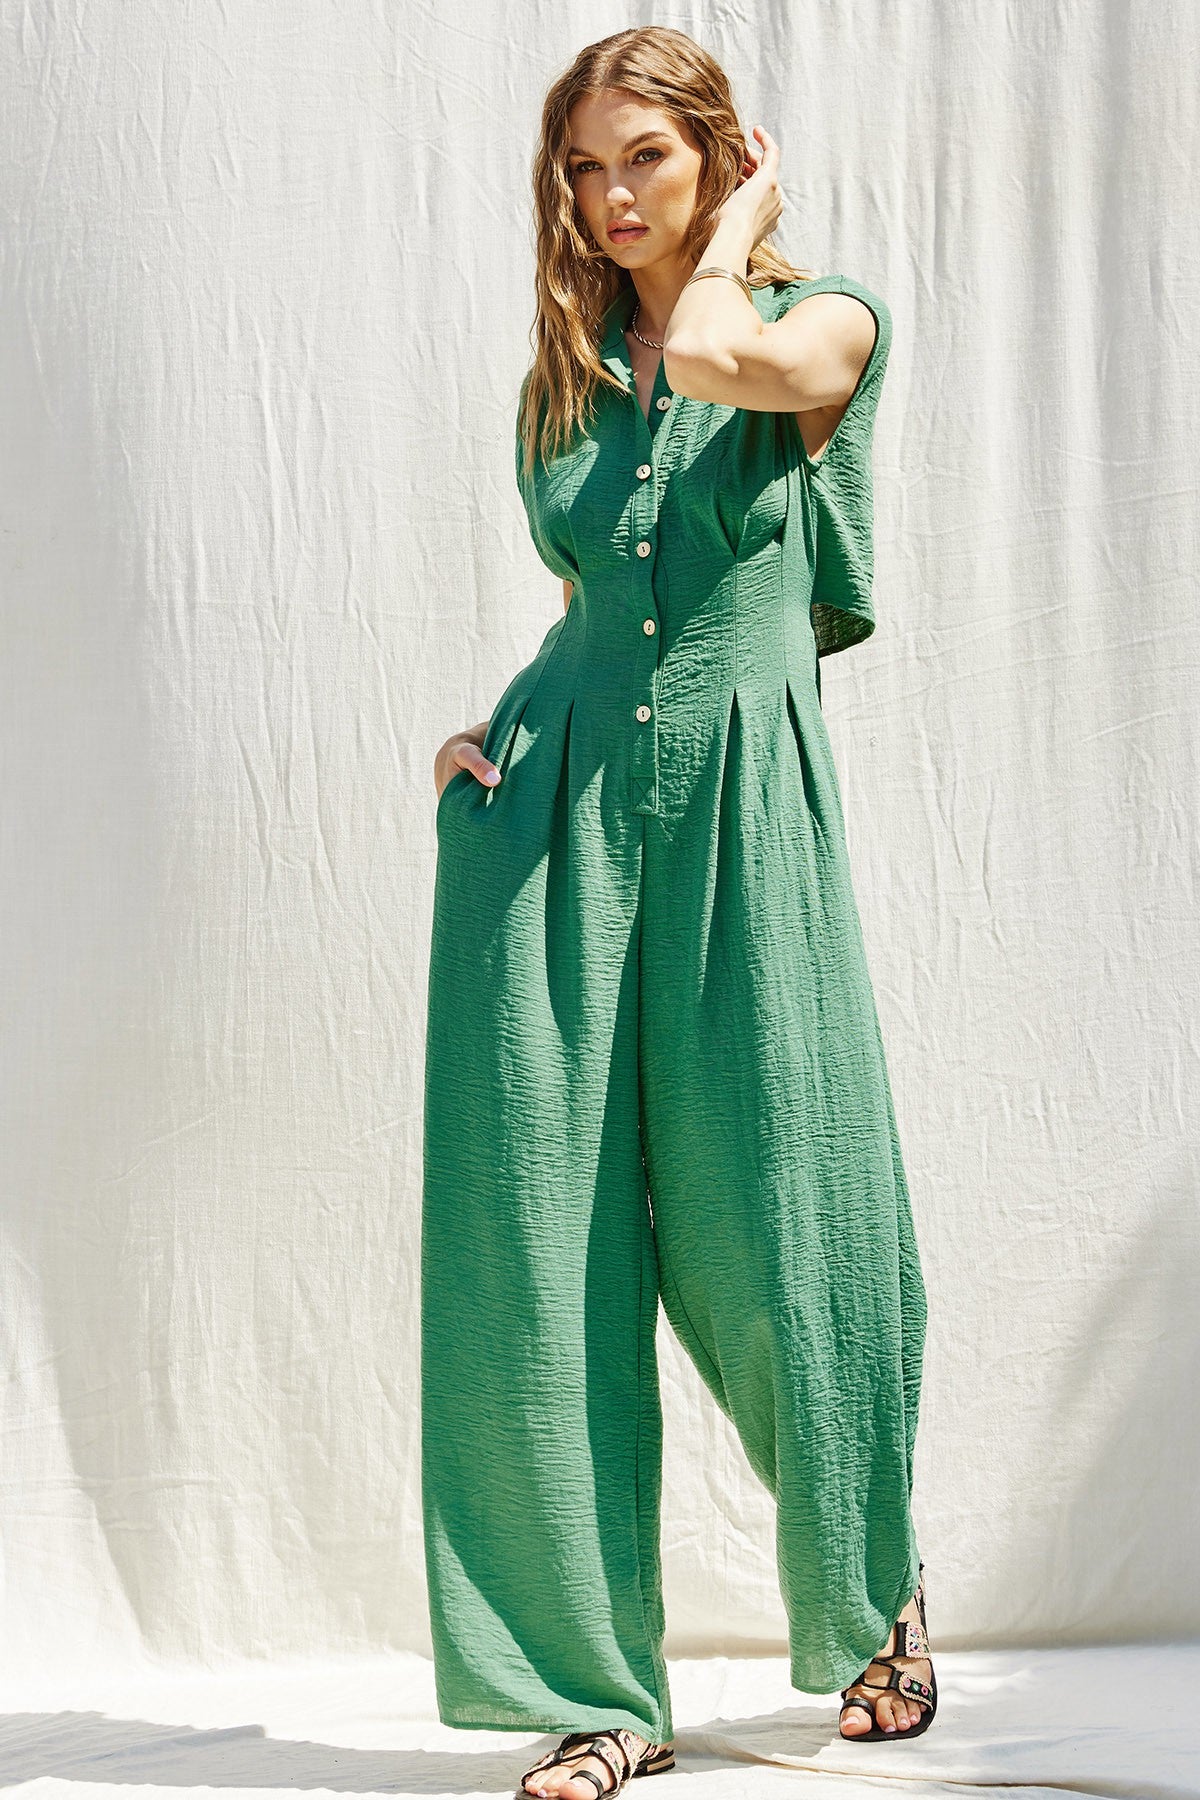 The City Chic Textured Wide Leg Jumpsuit